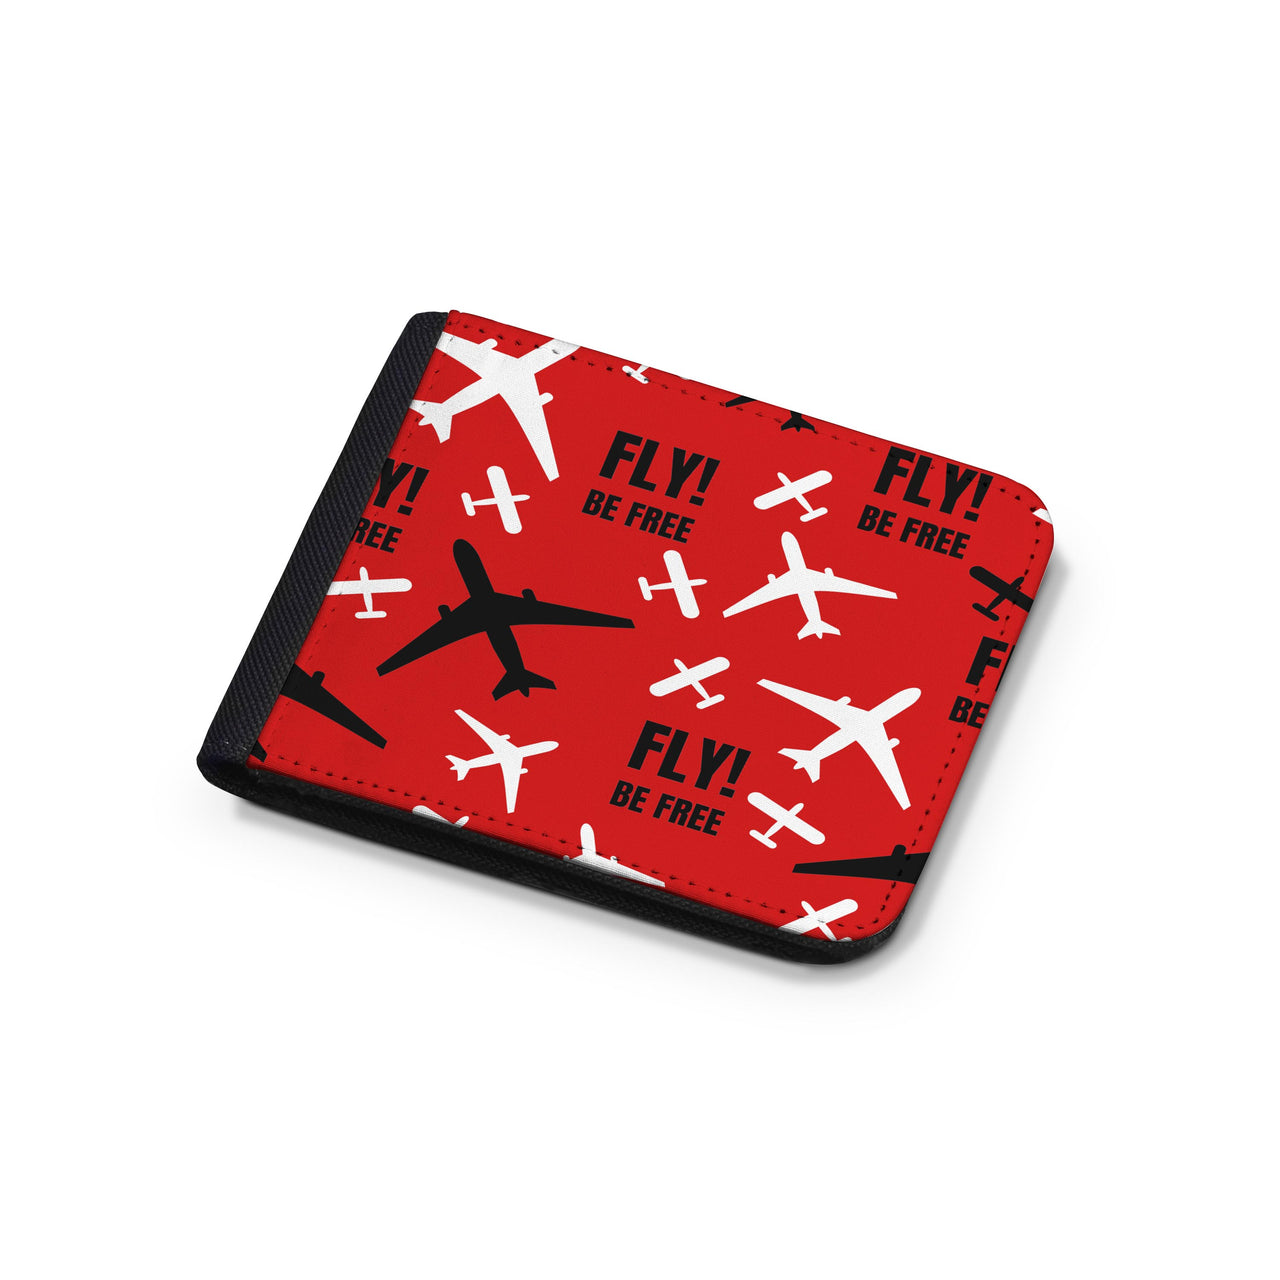 Fly Be Free Designed Wallets